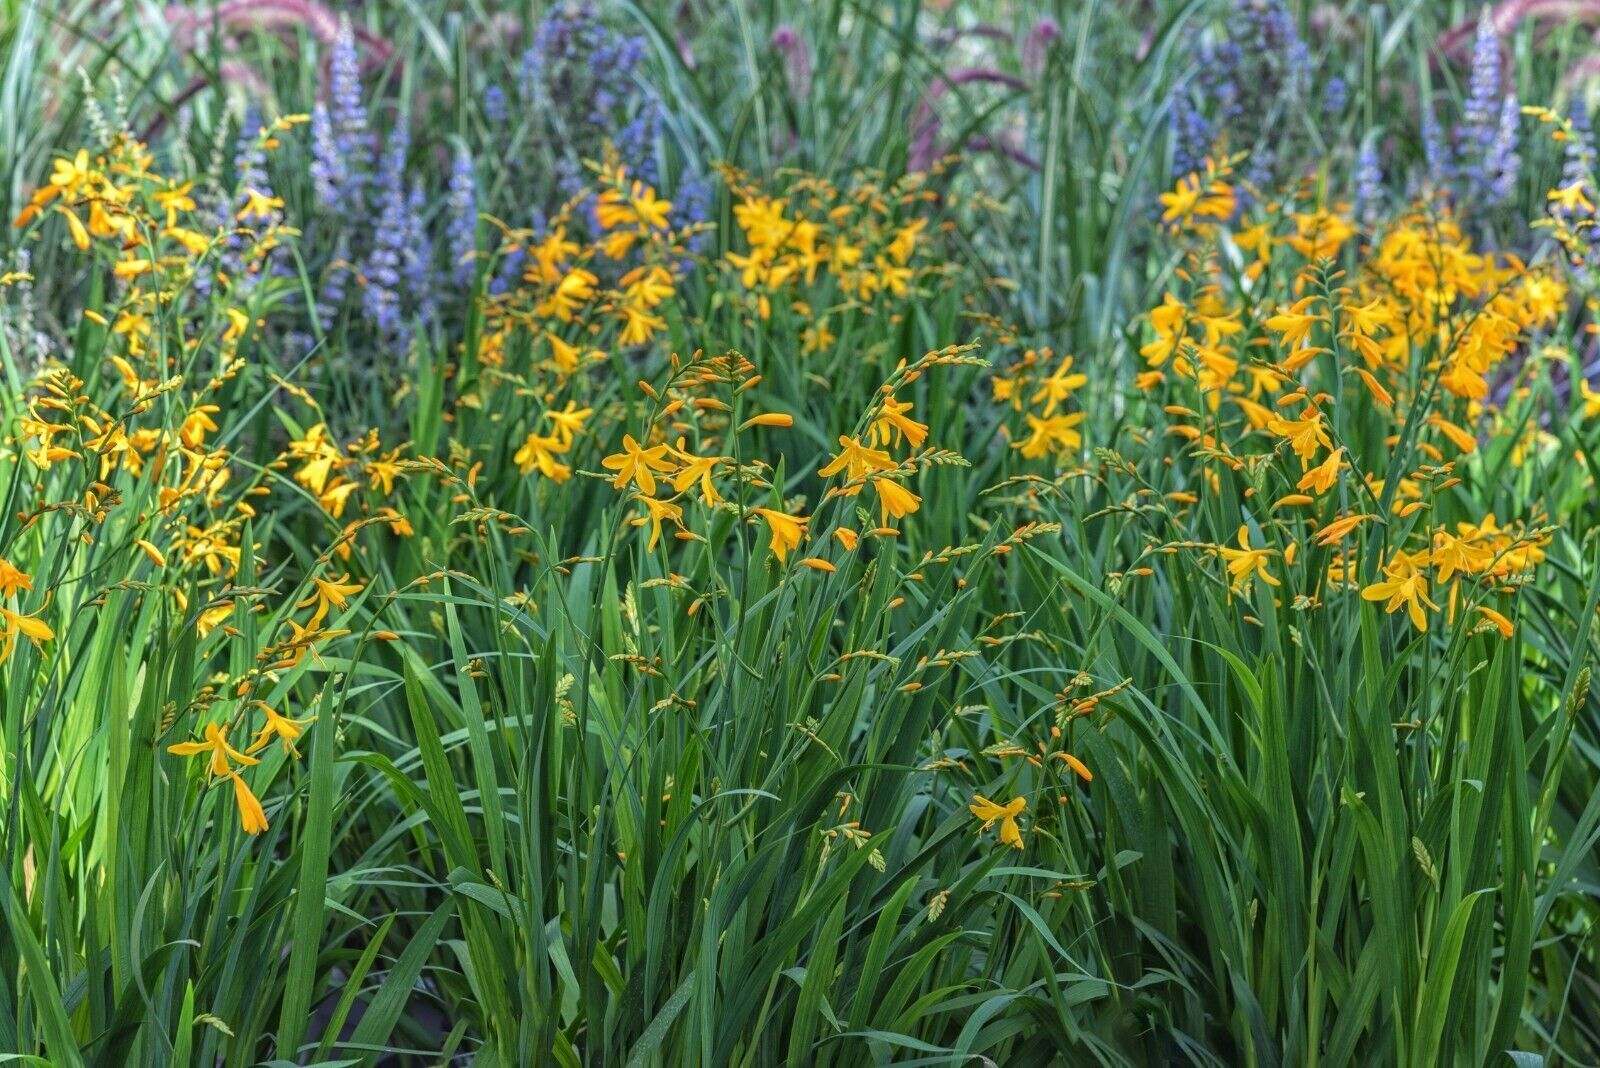 PICK YOUR DRAGON FLOWER - Choose From (7) Different Types of Crocosmia Bulbs!!!